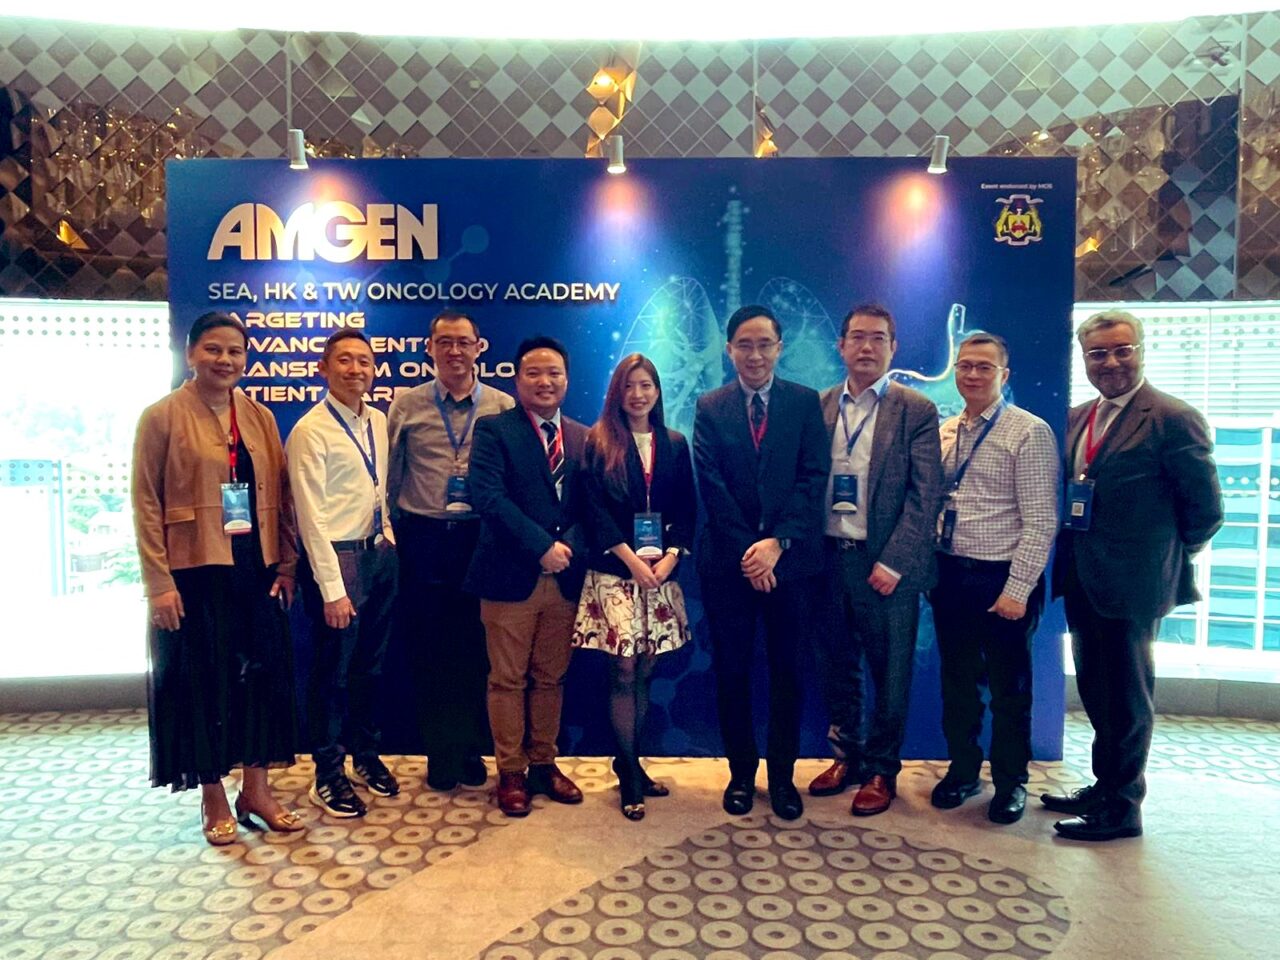 Herbert Loong: A privilege to participate and co-chair an informative event held at Amgen Oncology in Kuala Lumpur